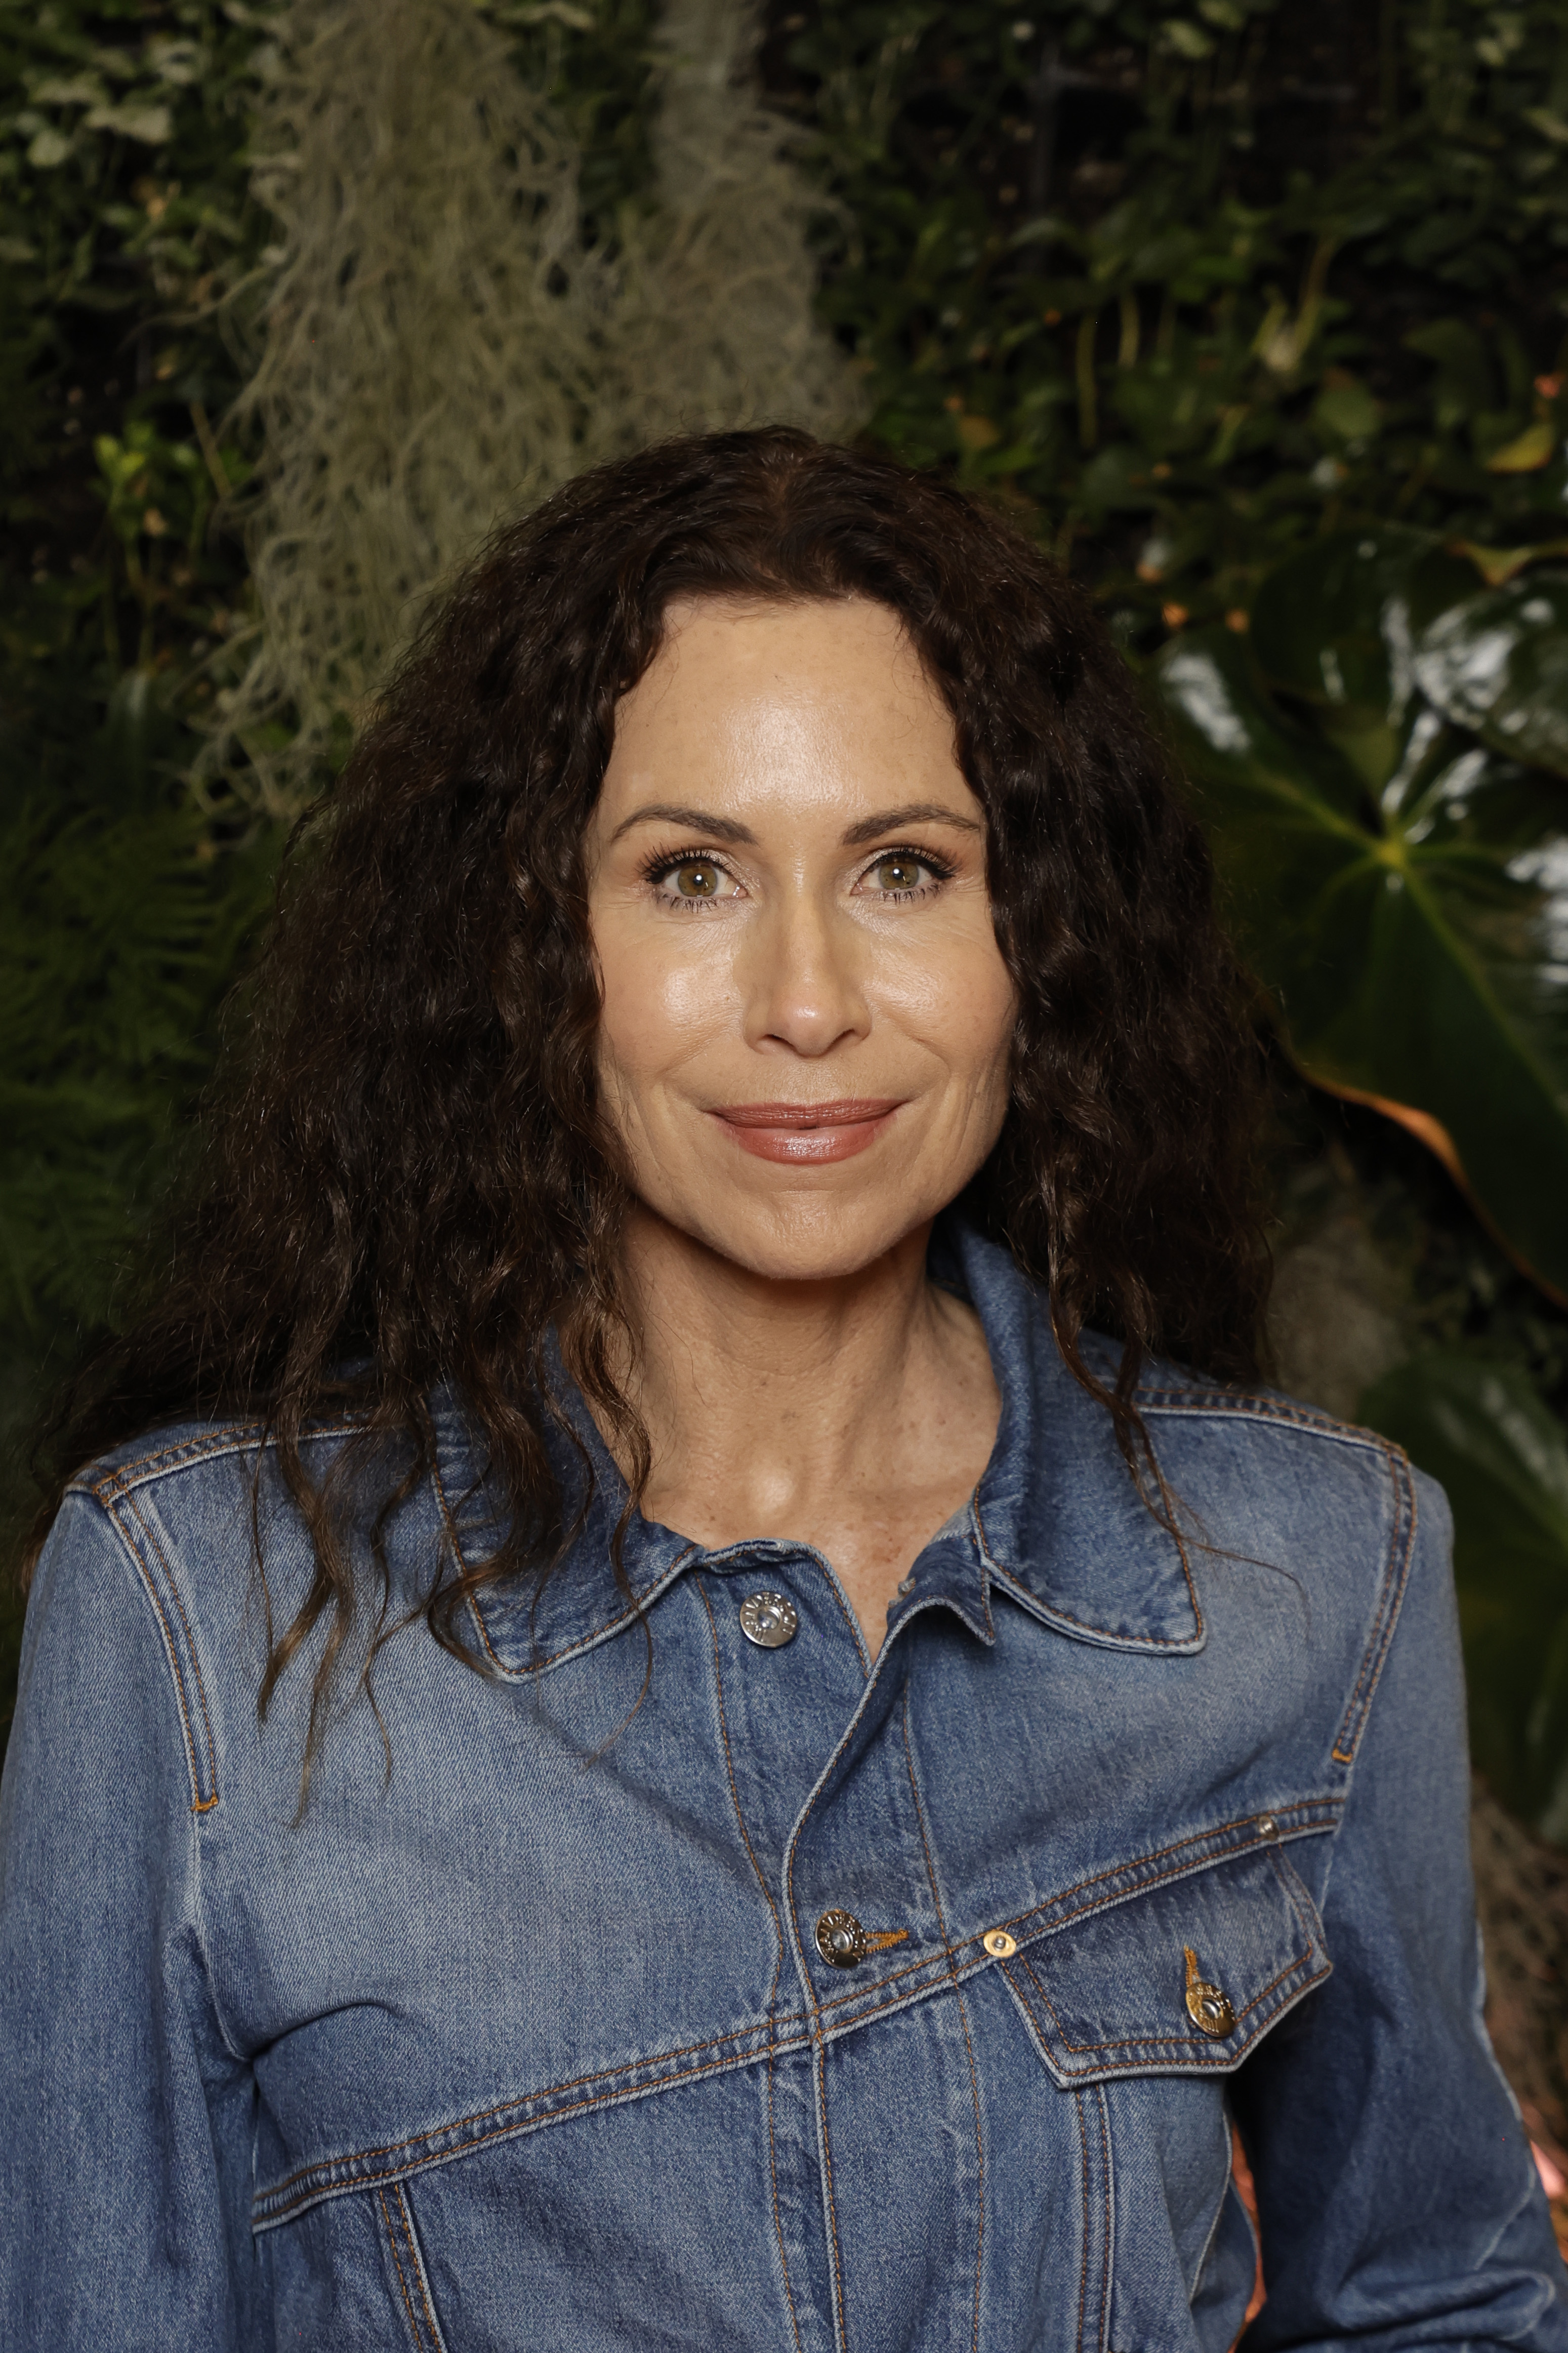 Minnie Driver smiles, wearing a denim jacket, standing in front of a leafy background